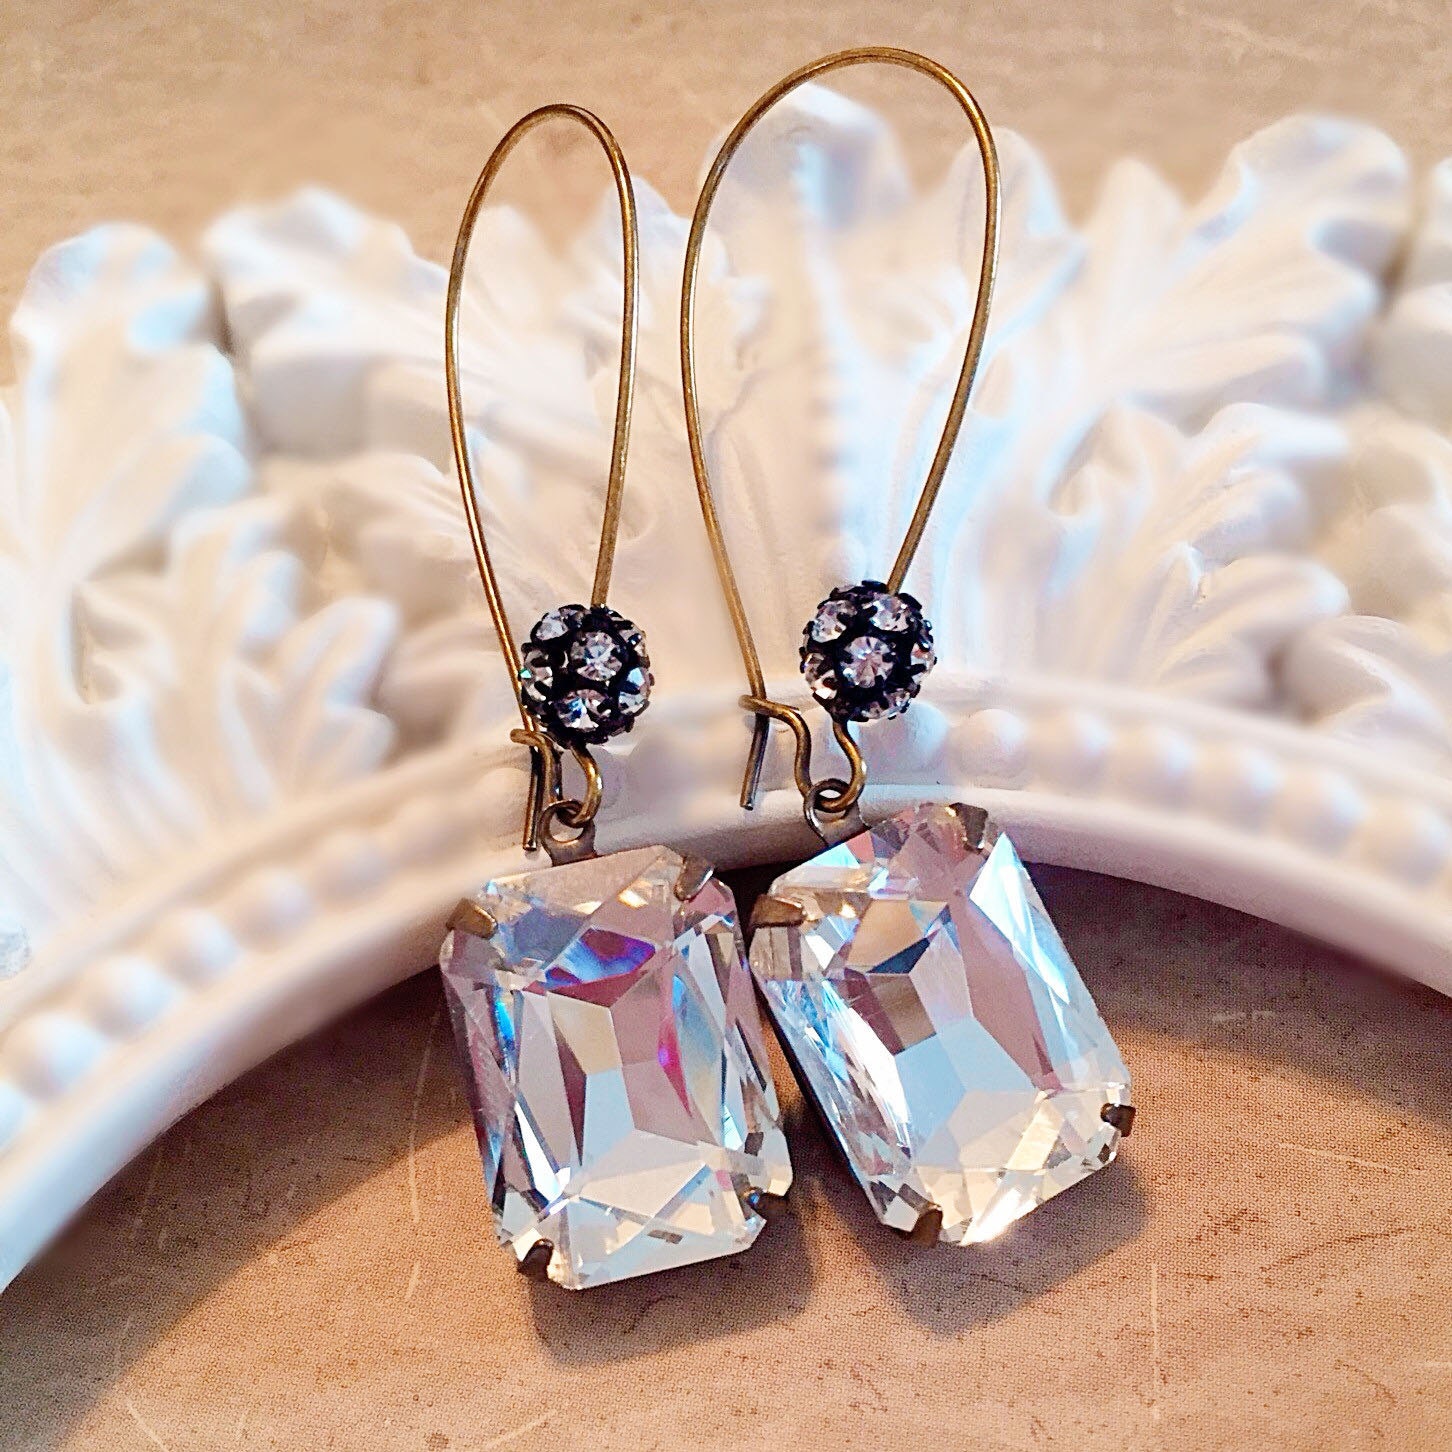 Crystal Holiday Earrings - Art Deco Jewelry - Victorian Jewelry - Crystal Earrings - MADELINE Crystal